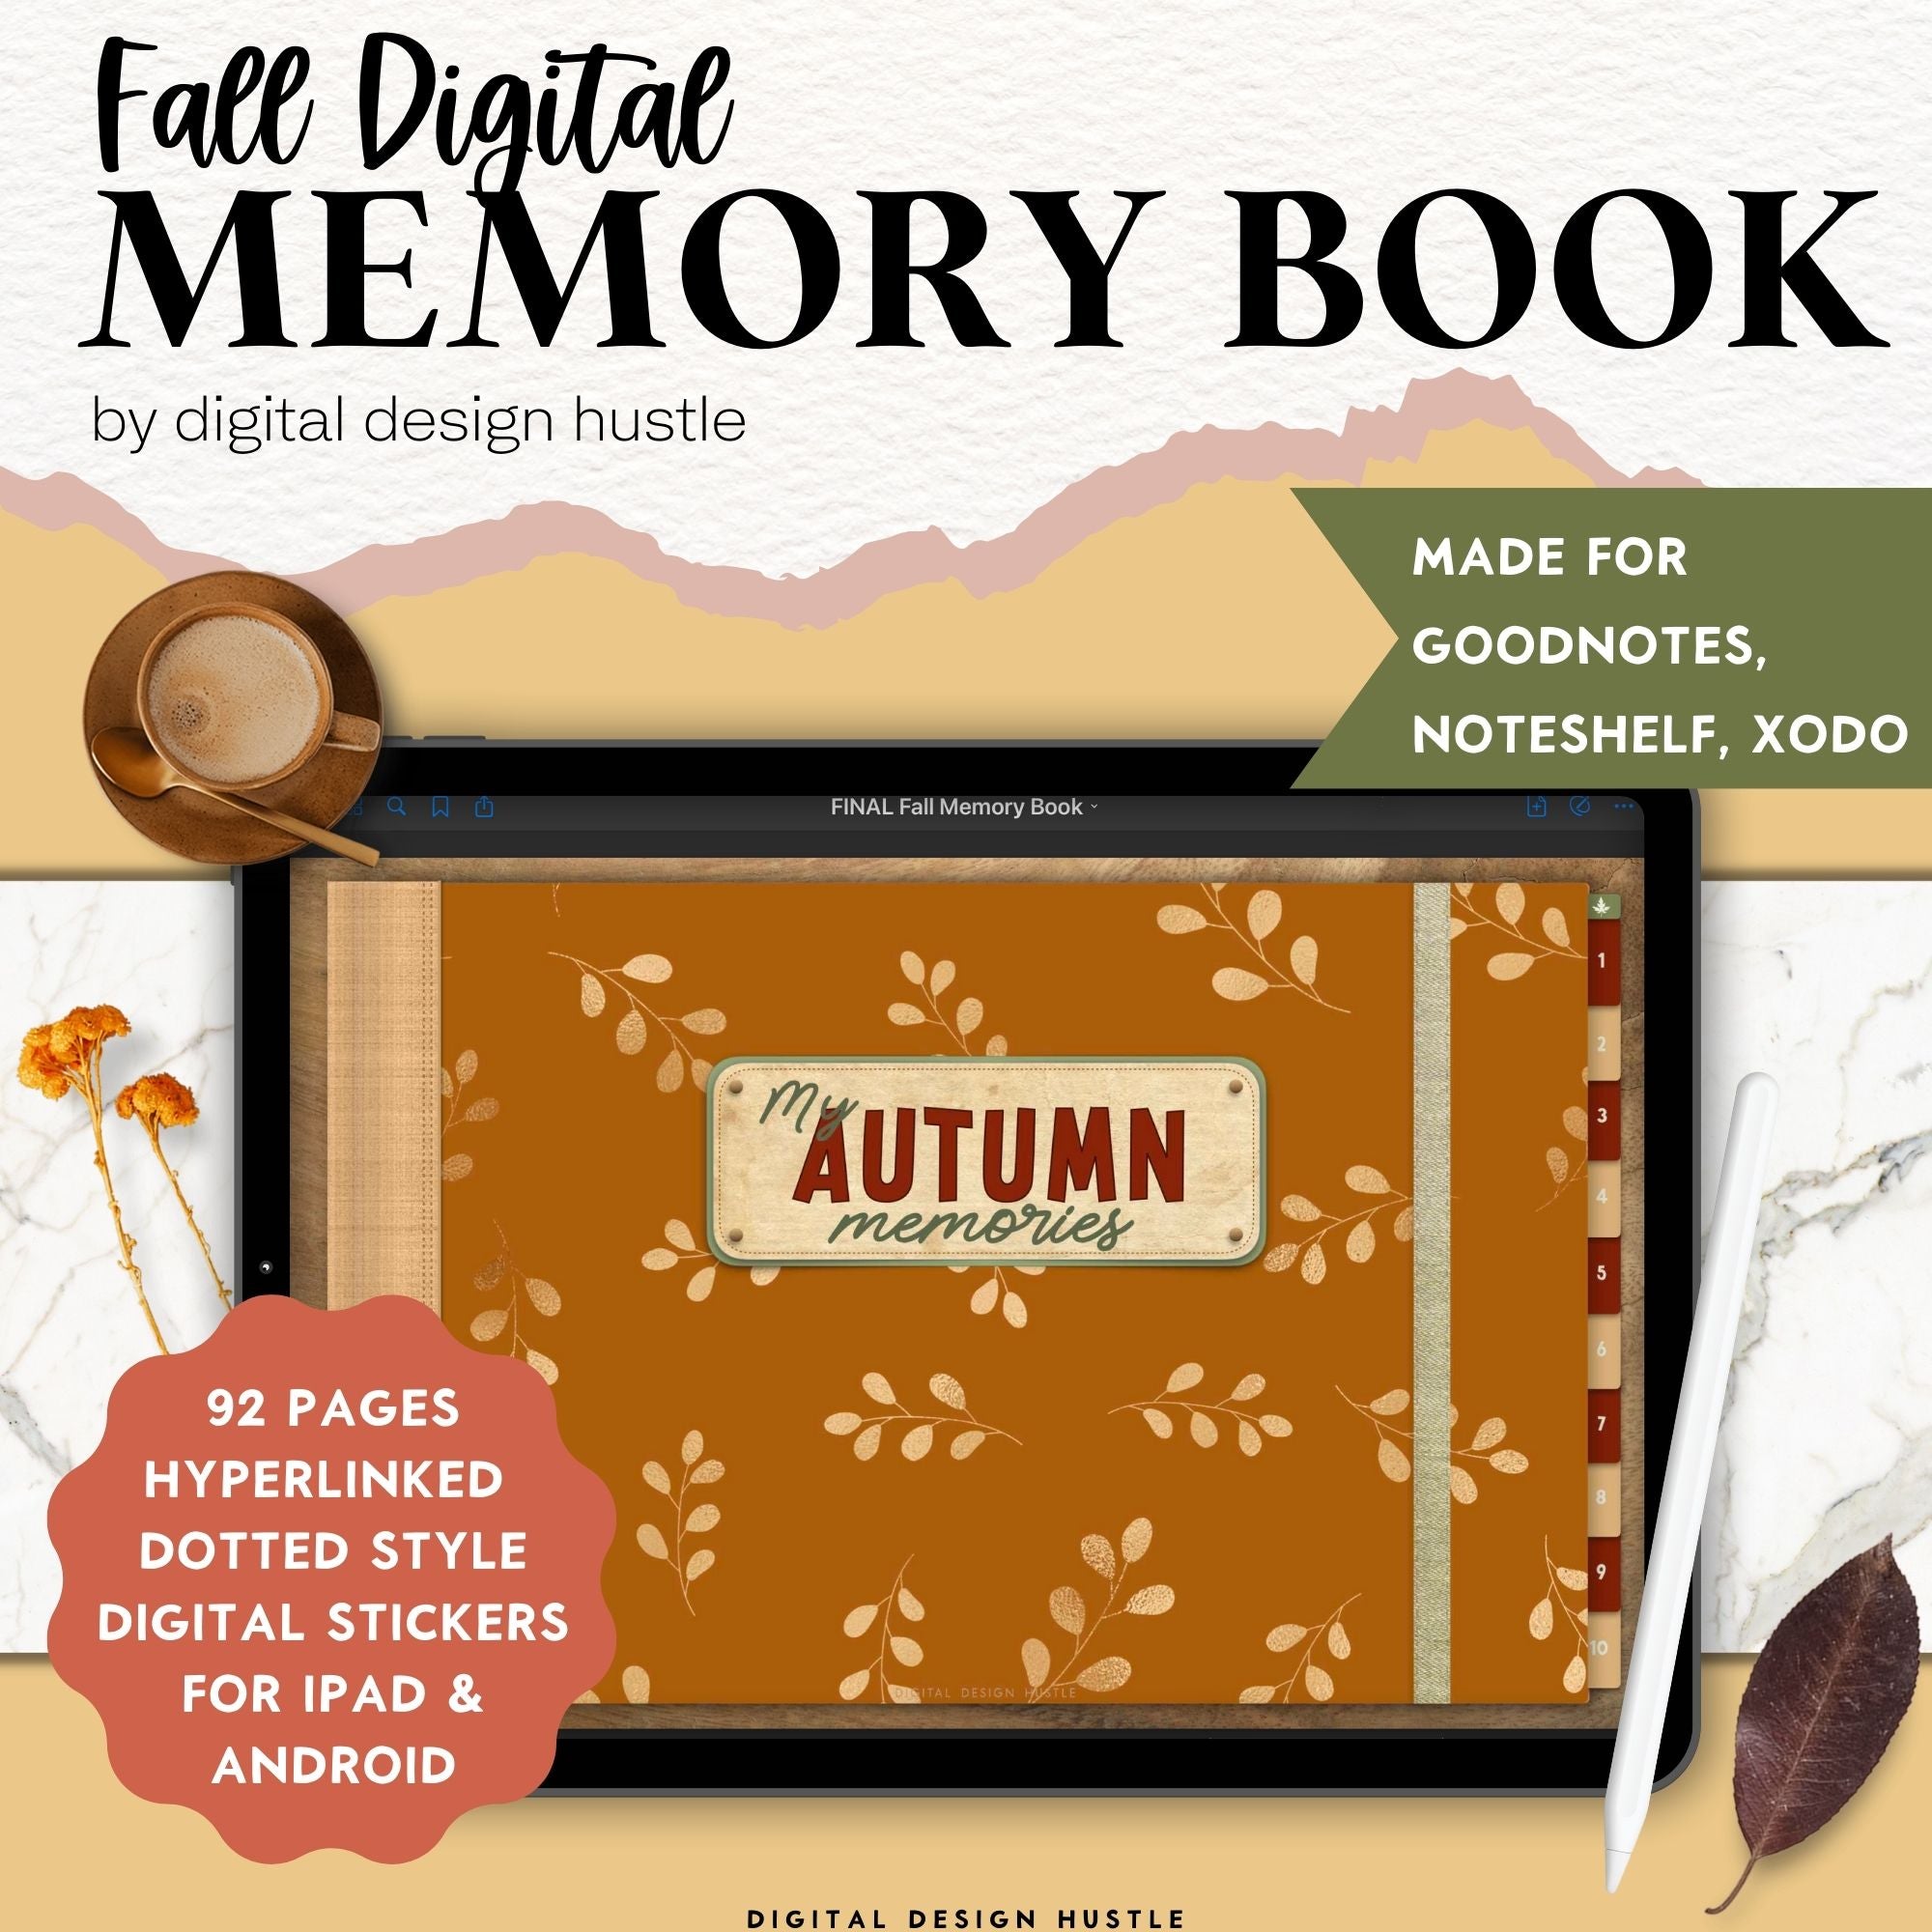 Record special family memories in this Digital Fall Memory Book. Capture all your special memories with family and friends in the 92-page digital journal. This is the perfect scrapbook to document Halloween, Thanksgiving, Pumpkin Picking and family holidays.